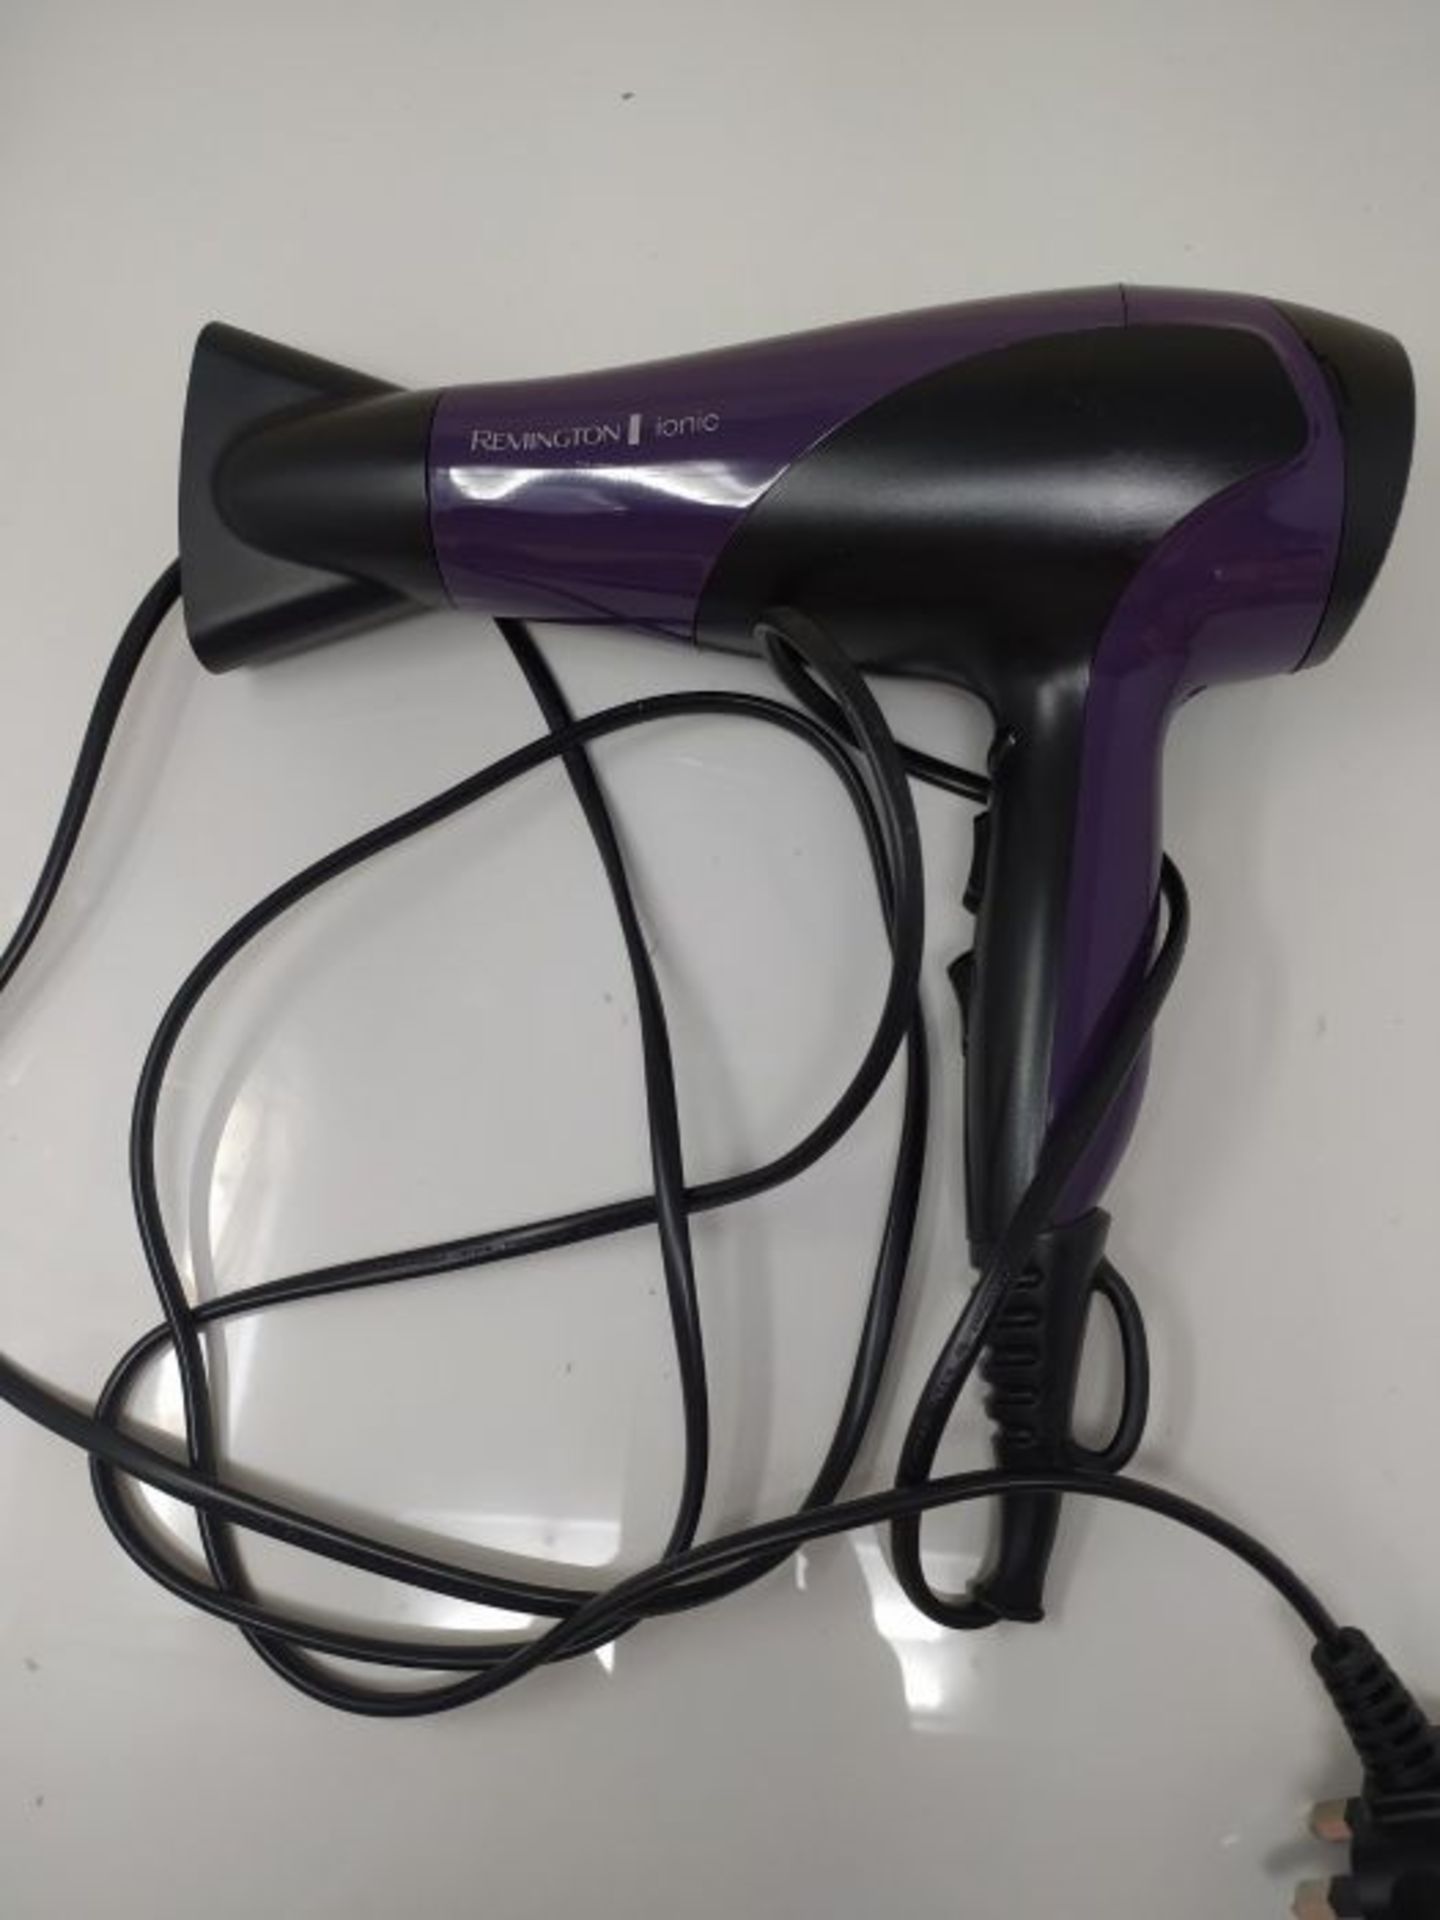 Remington D3190 Ionic Conditioning Hair Dryer for Frizz Free Styling with Diffuser and - Image 2 of 2